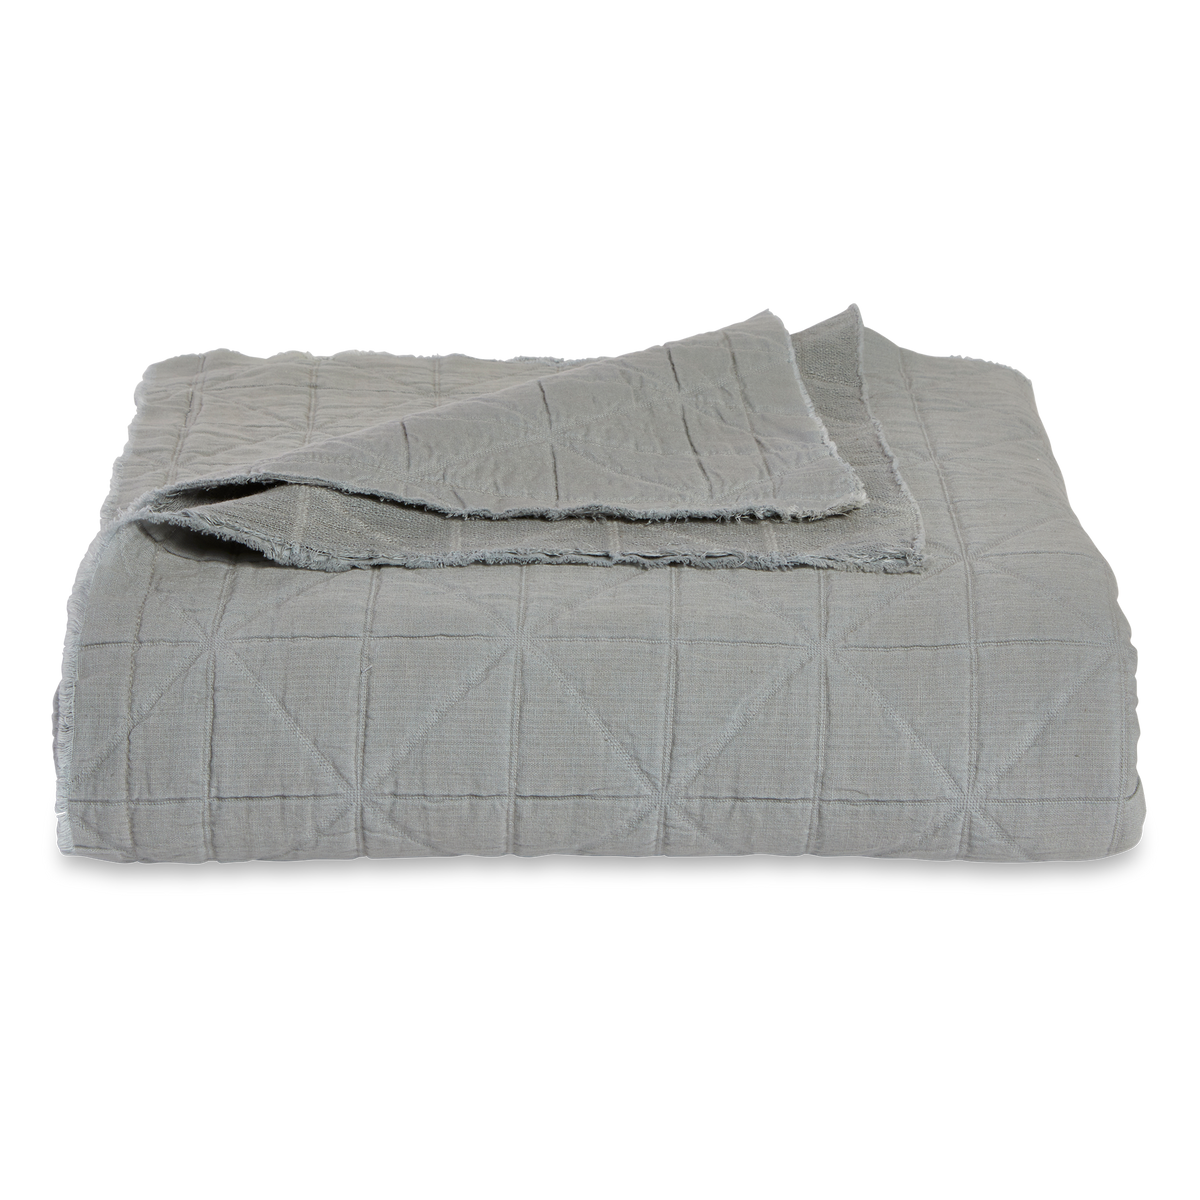 Relaxed and casual, this quilted coverlet is made with cotton and has the perfect summer weight.